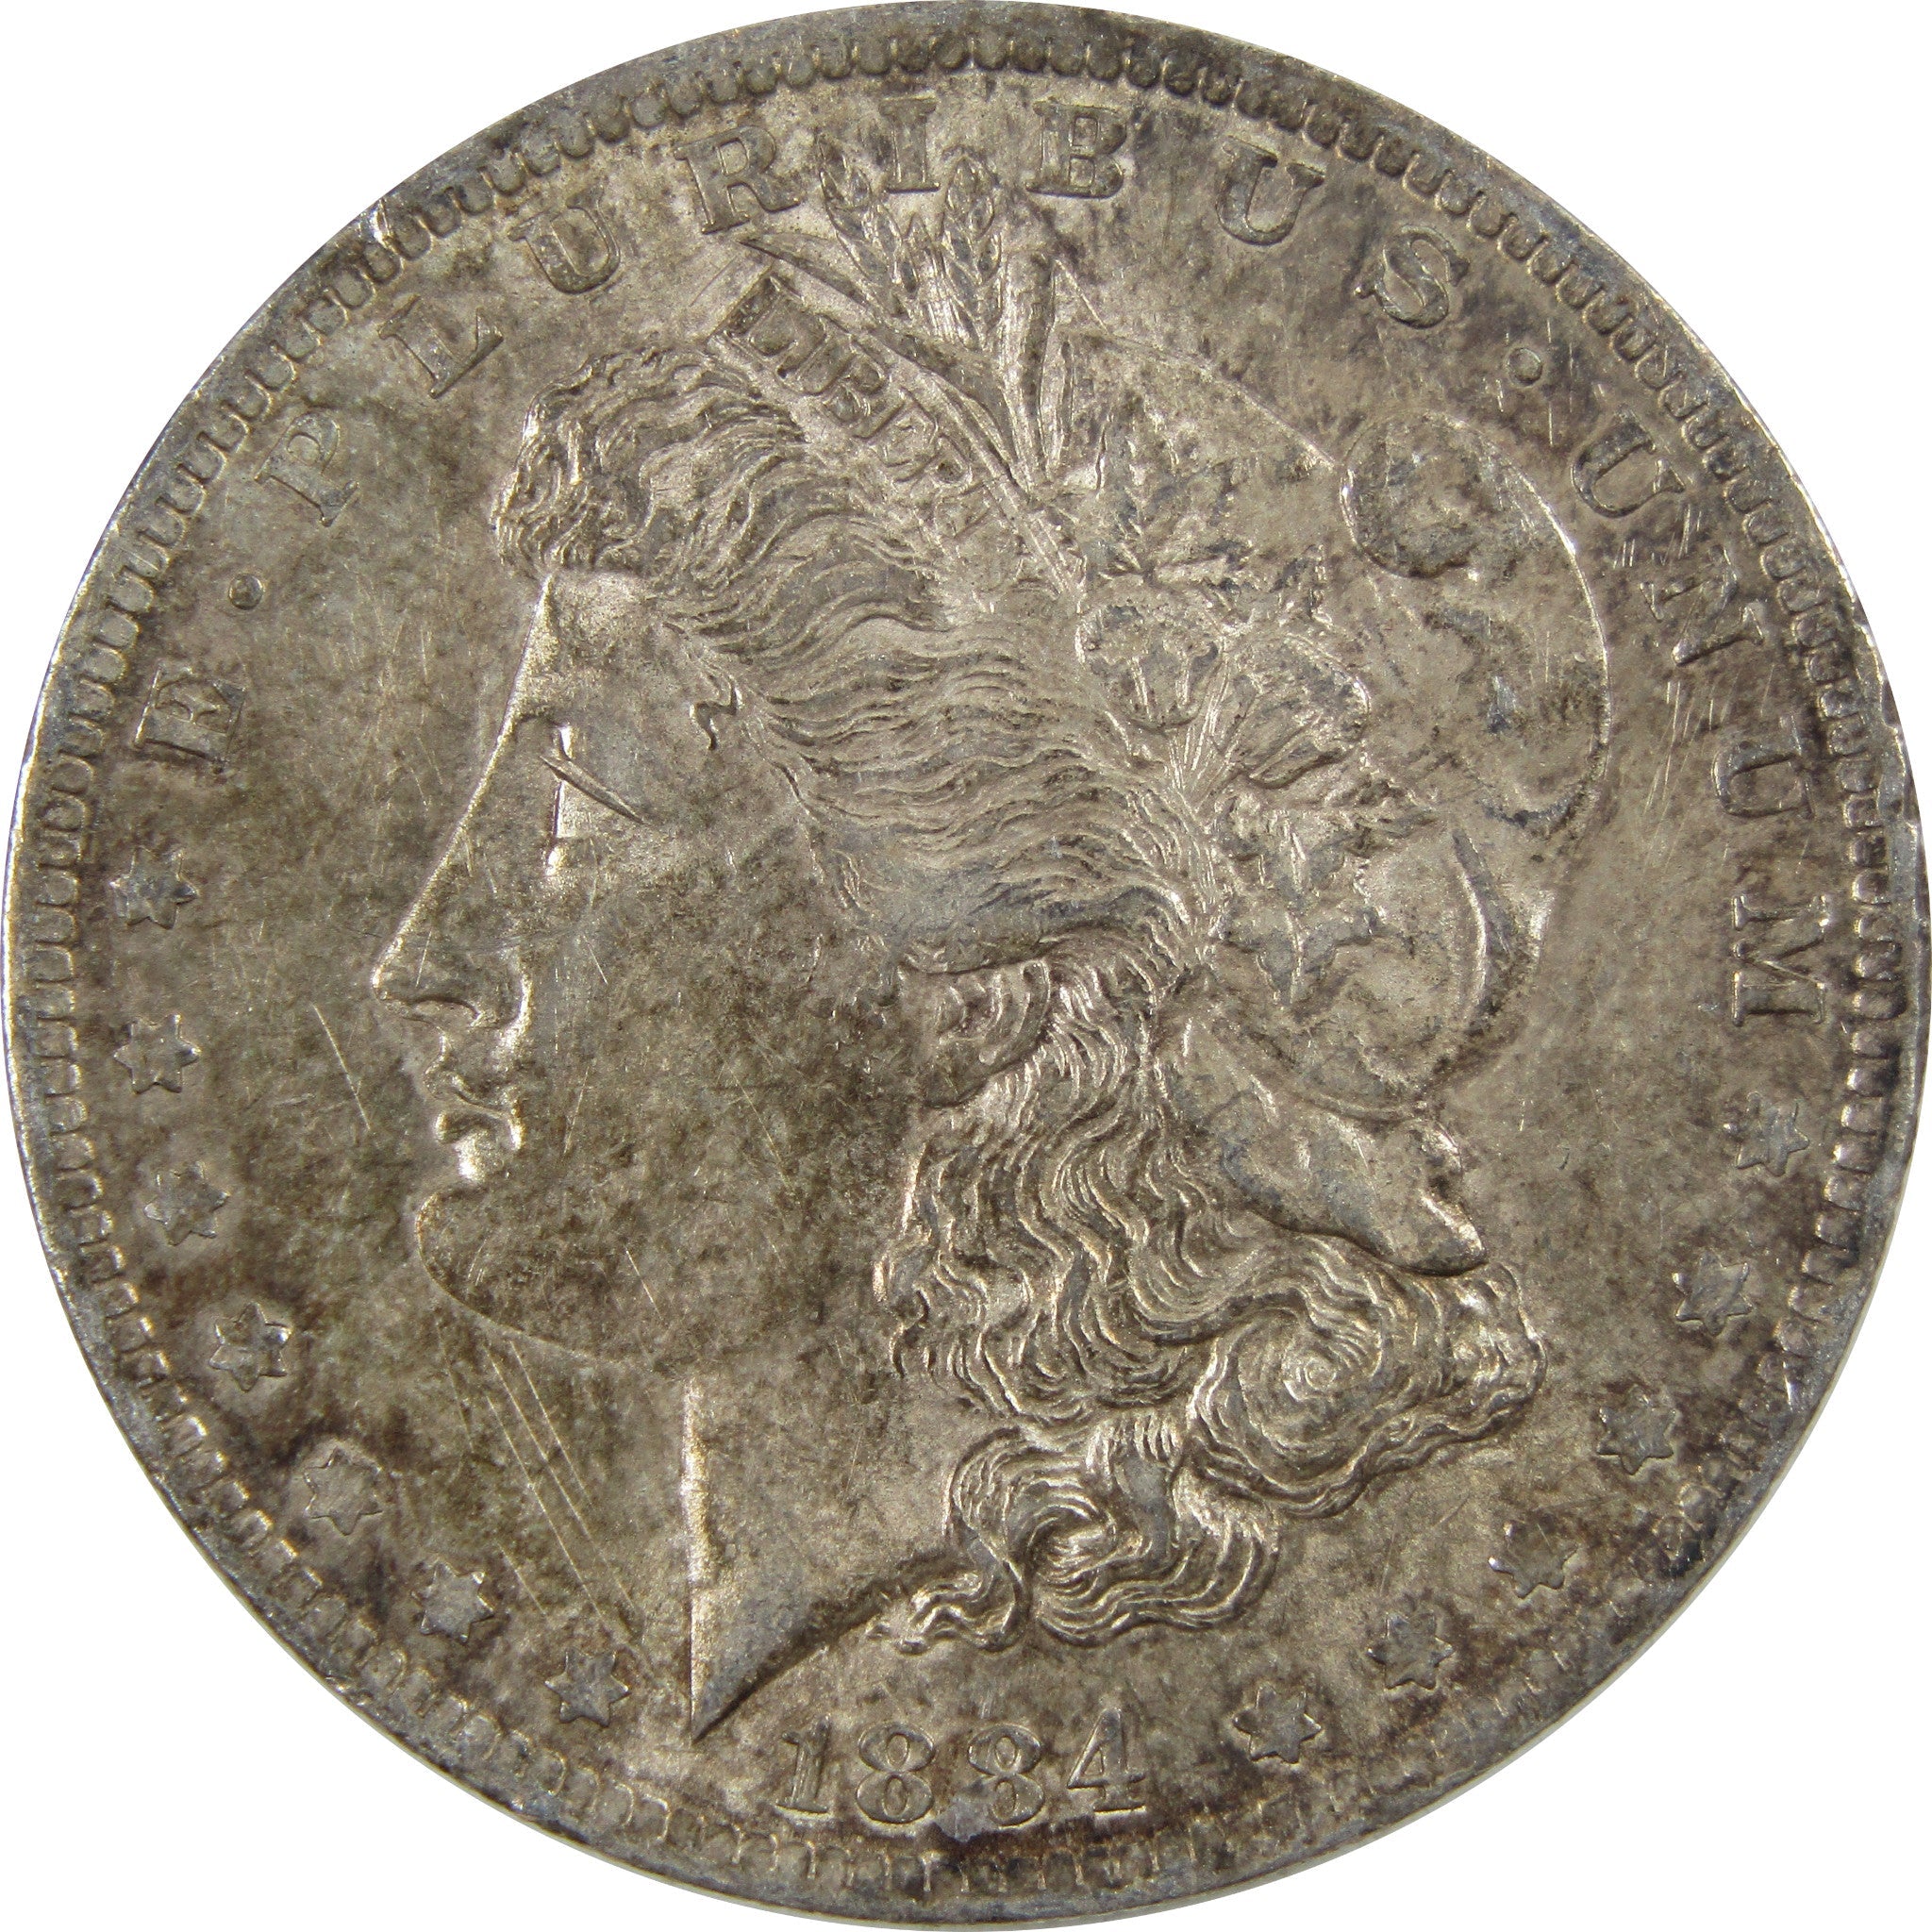 1884 O Morgan Dollar AU About Uncirculated 90% Silver $1 SKU:I5502 - Morgan coin - Morgan silver dollar - Morgan silver dollar for sale - Profile Coins &amp; Collectibles